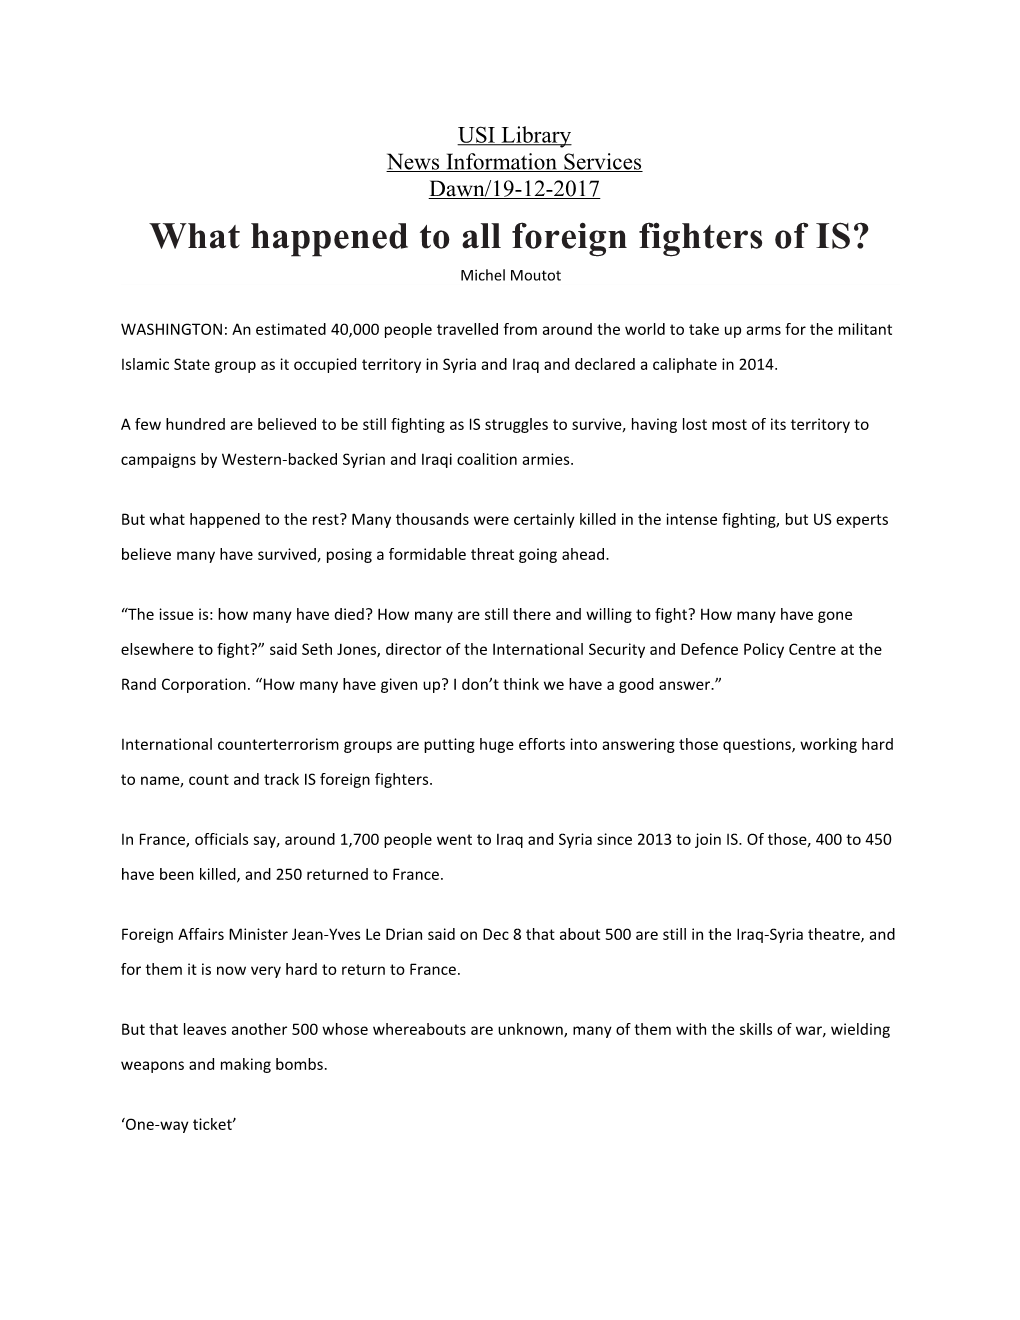 What Happened to All Foreign Fighters of IS?